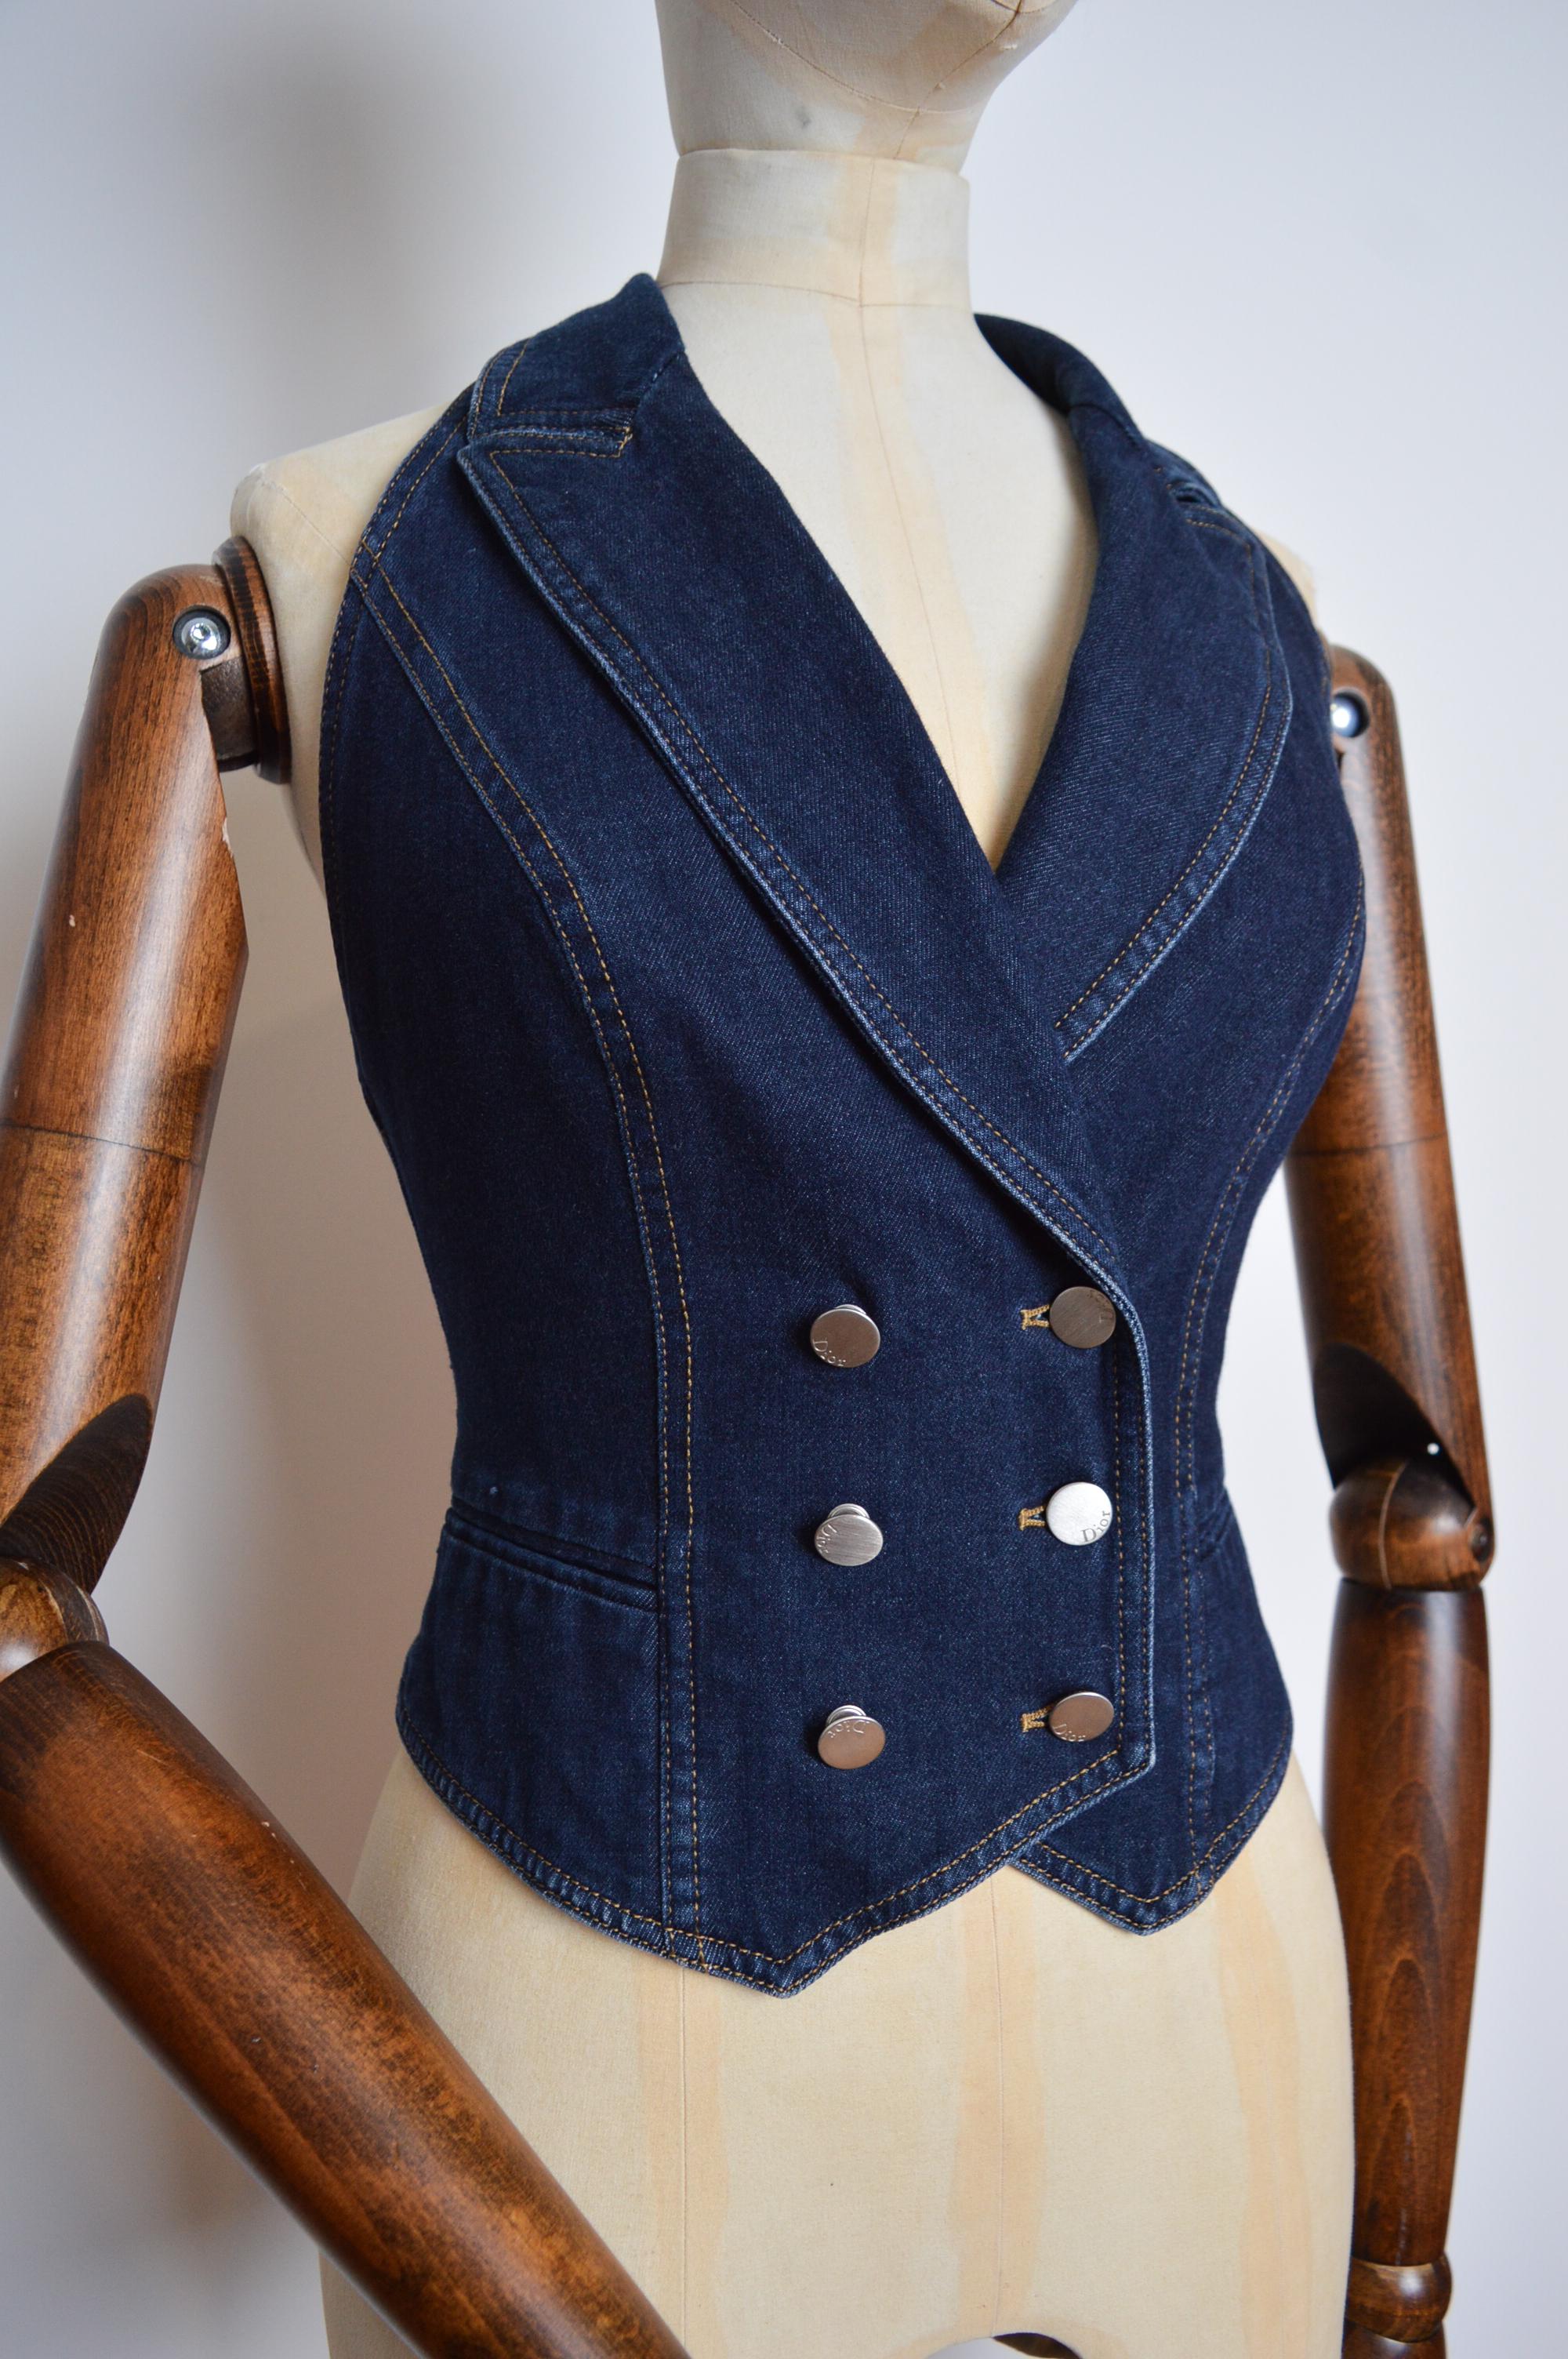 Early 2000's Dark Blue denim, backless waistcoat style Top by John Galliano for Christian Dior.

Featuring a double breasted front with tuxedo style collar and deep, scooped adjustable back (with metal 'Dior' embossed hardware) to ensure the perfect